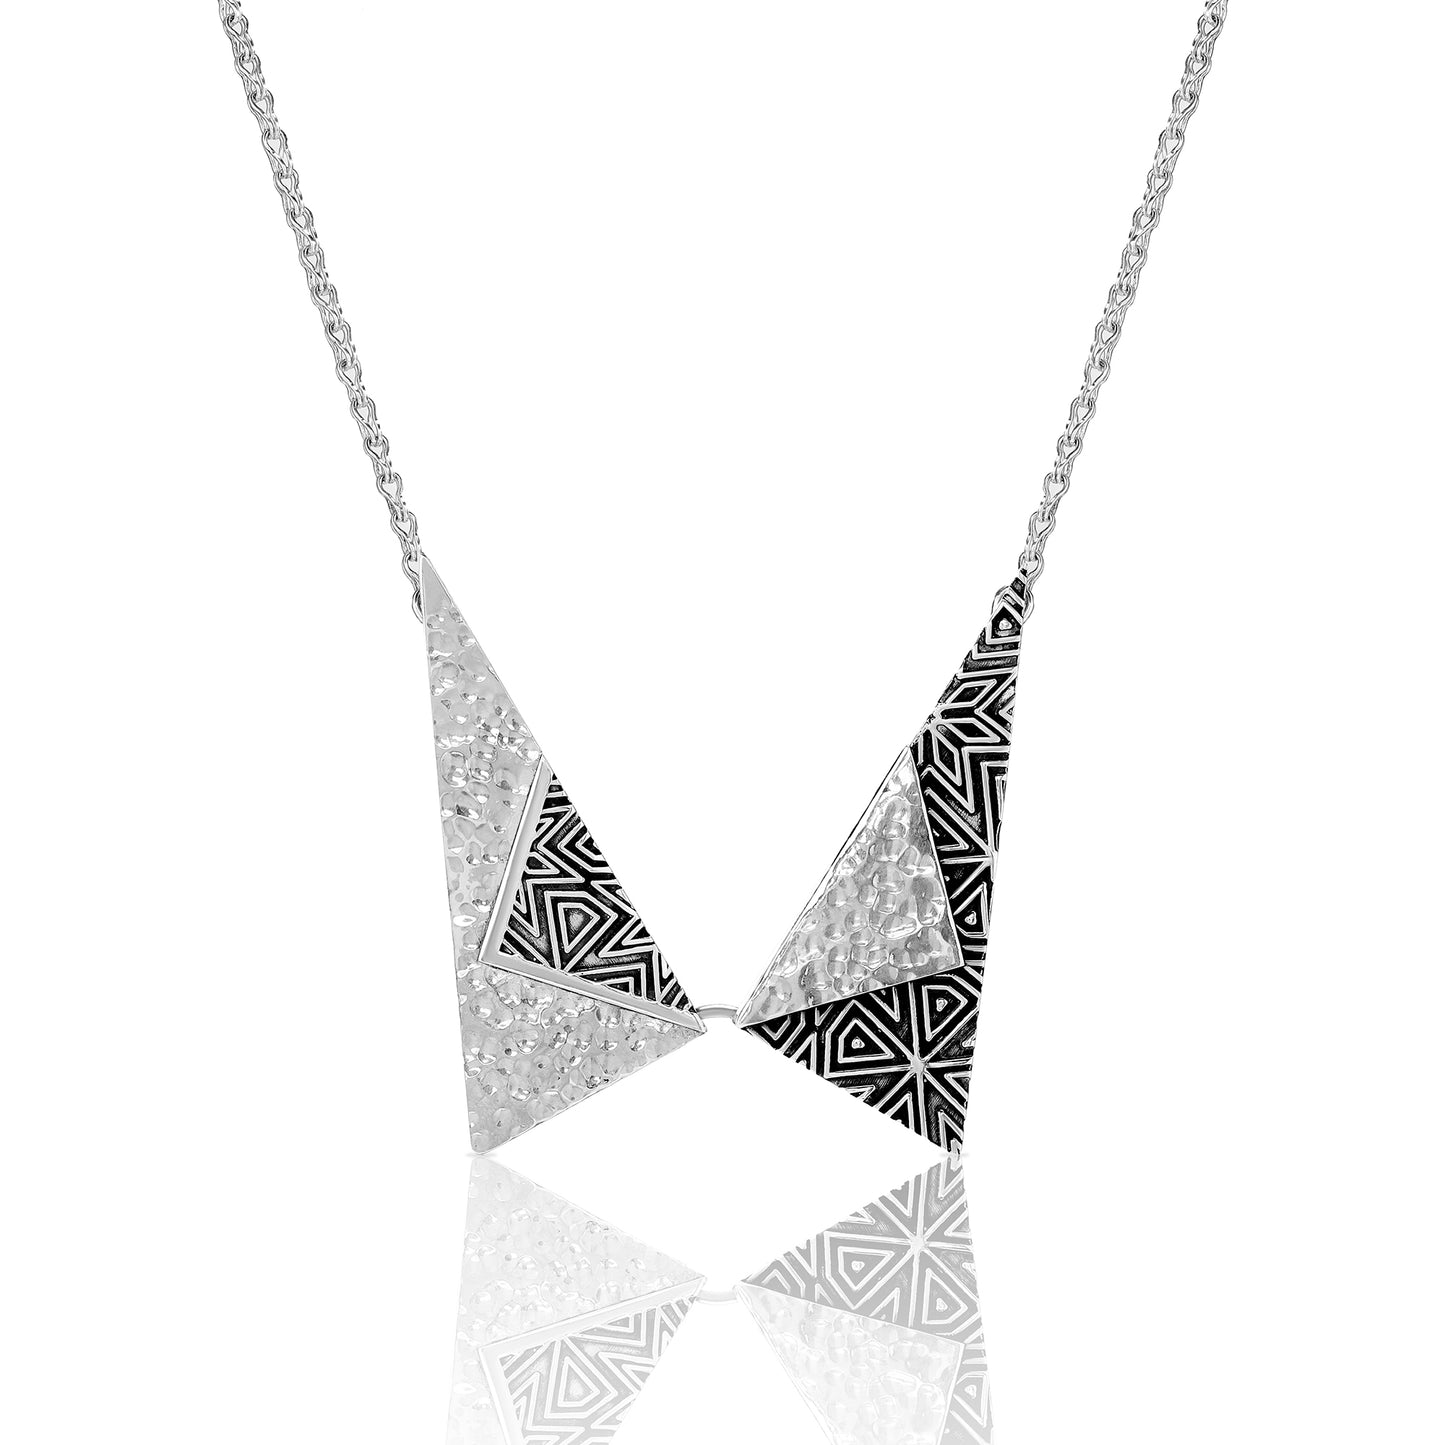 Collared Architect Necklace